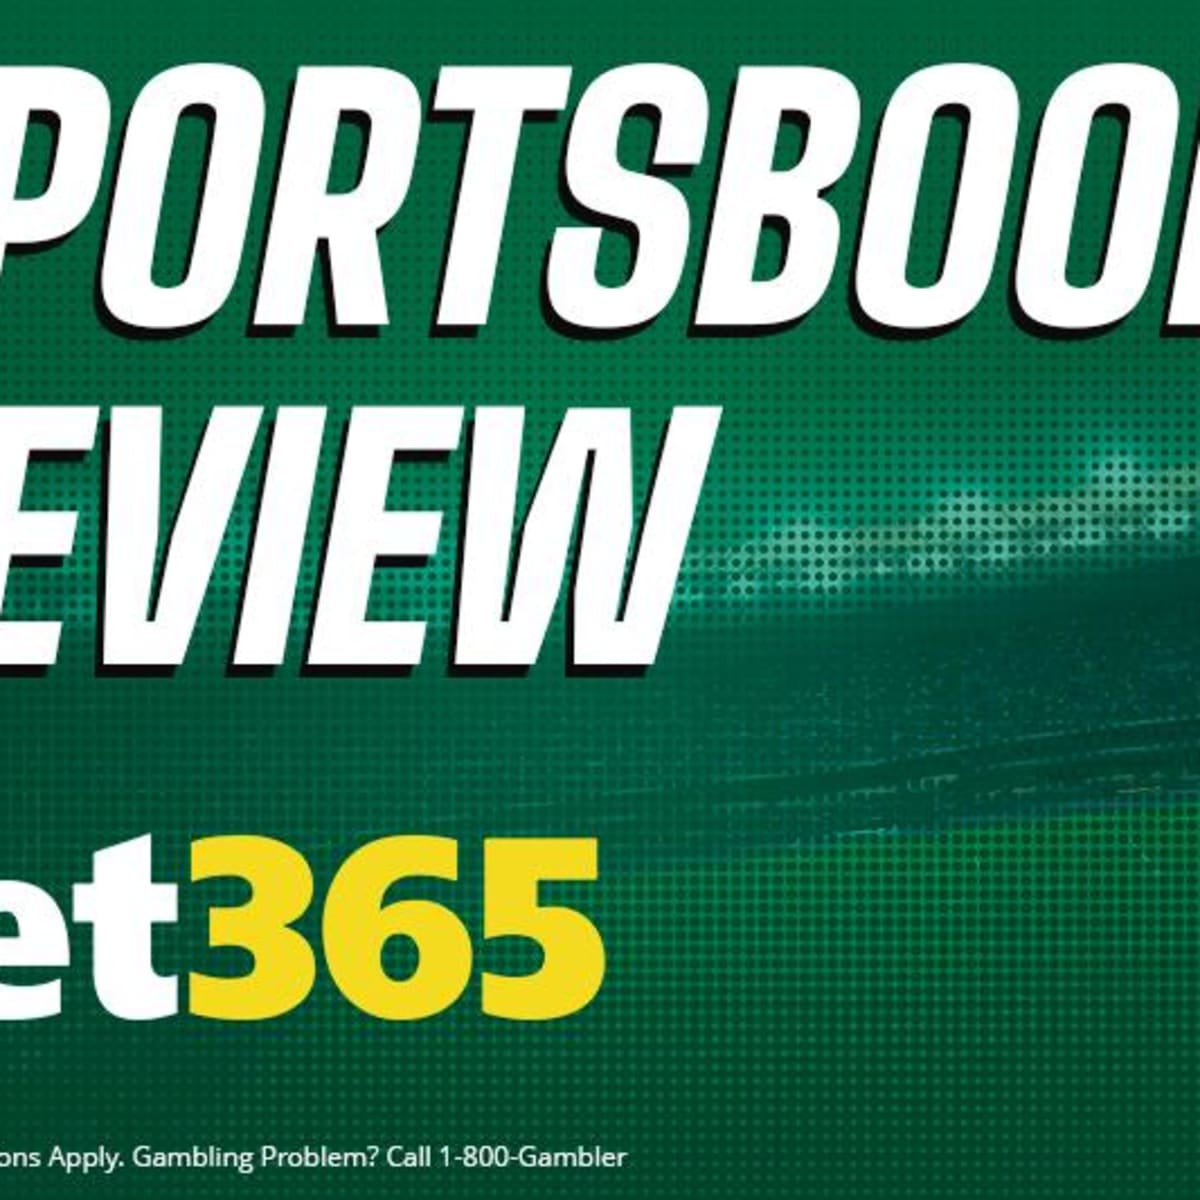 Bet365 Review Should I Bet with Bet365?